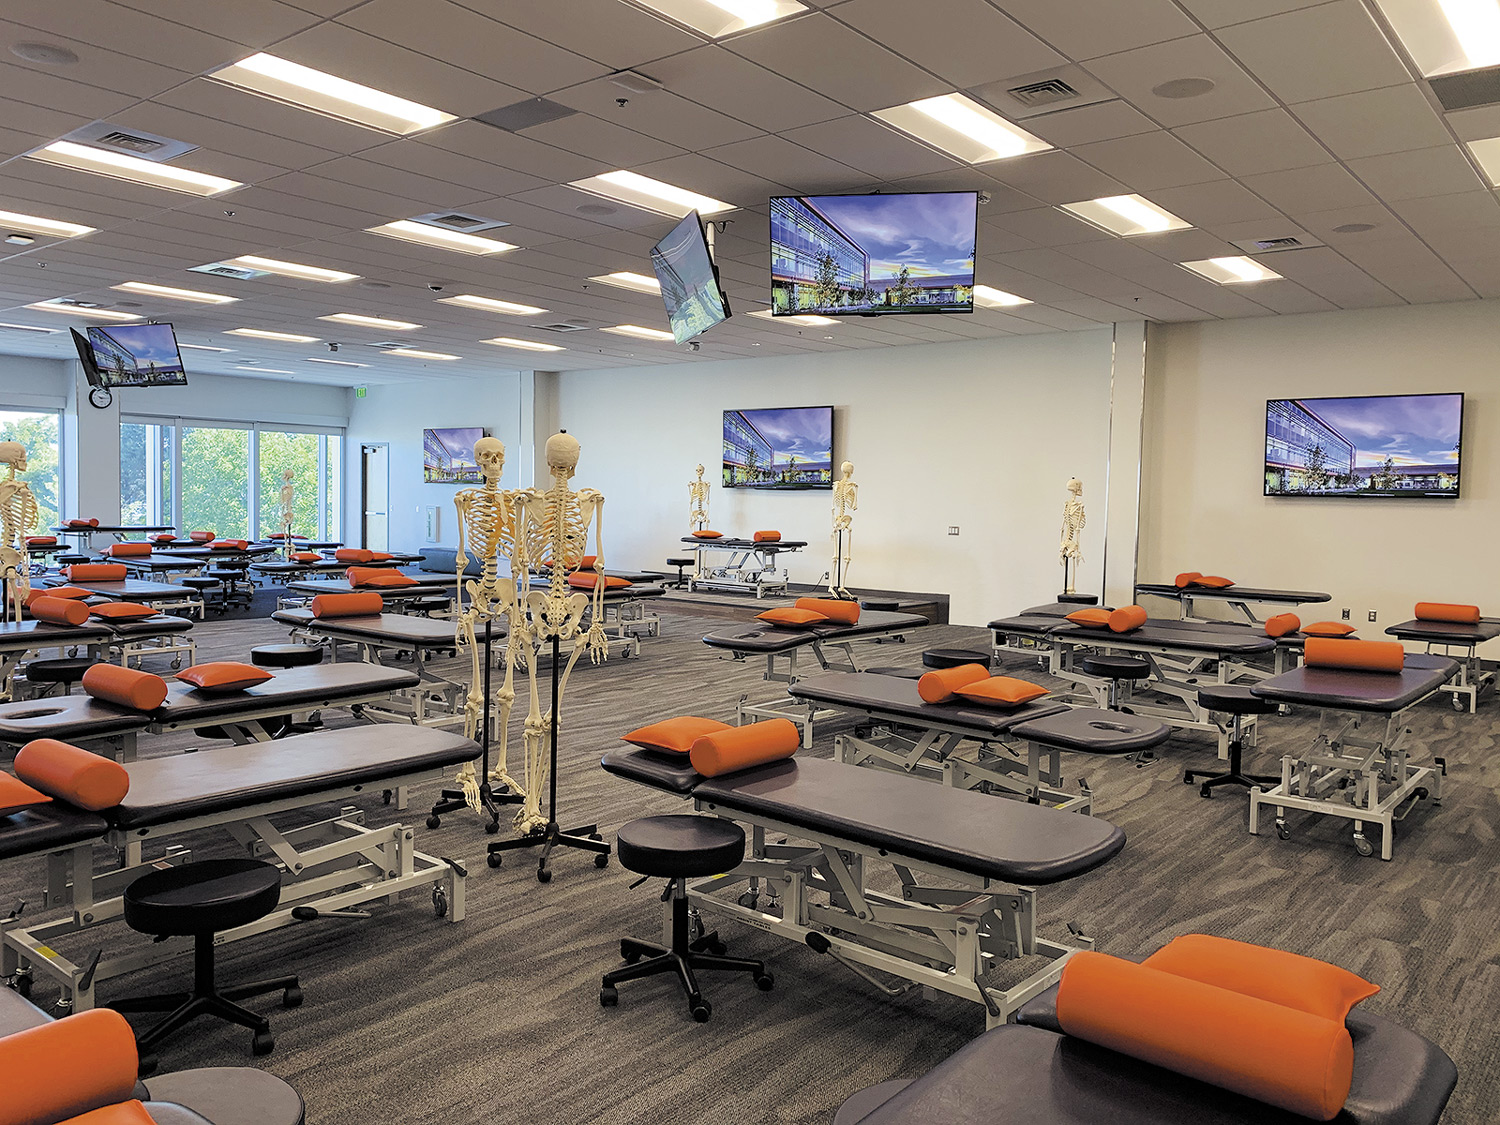 The Osteopathic Manipulative Medicine  – OMM lab includes multiple PTZ cameras and displays, capturing and presenting activities taking place at any of the 40 hydraulic treatment tables.